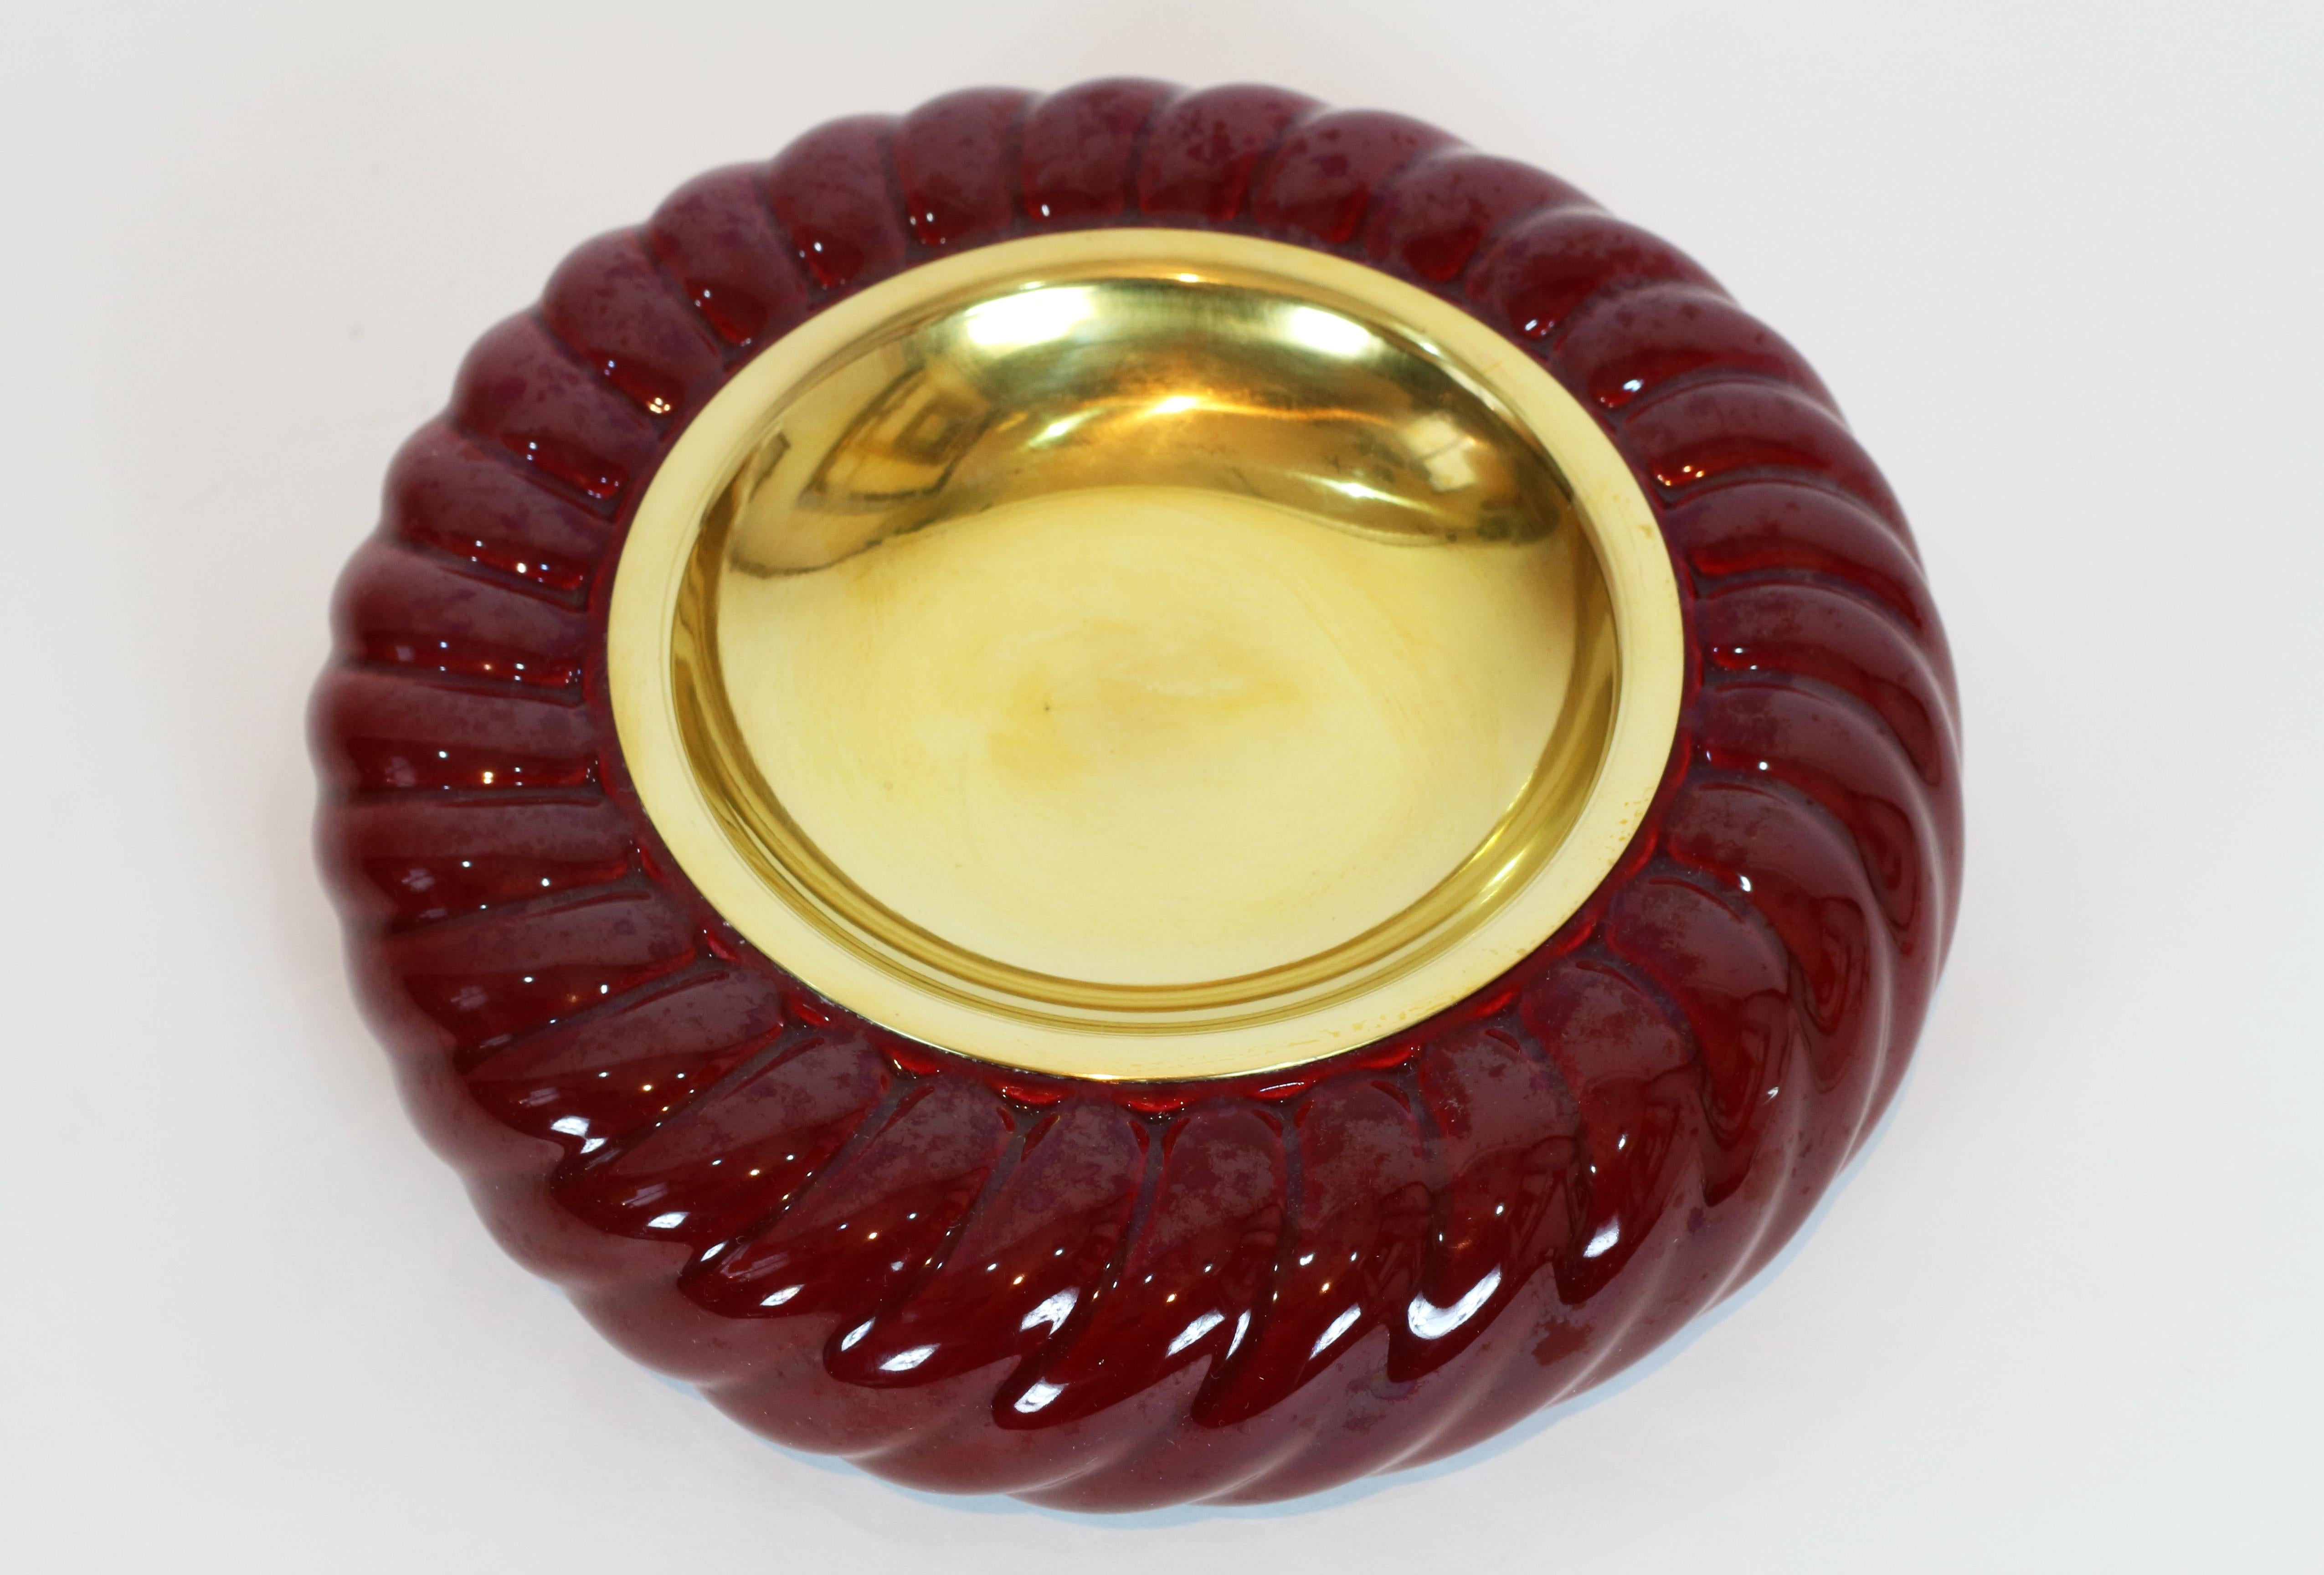 Tommaso Barbi glazed ceramic and brass pocket emptier or ashtray, signed with label on the bottom.

We remain at your complete disposal for any other needs.

Lustri -
Italy
 